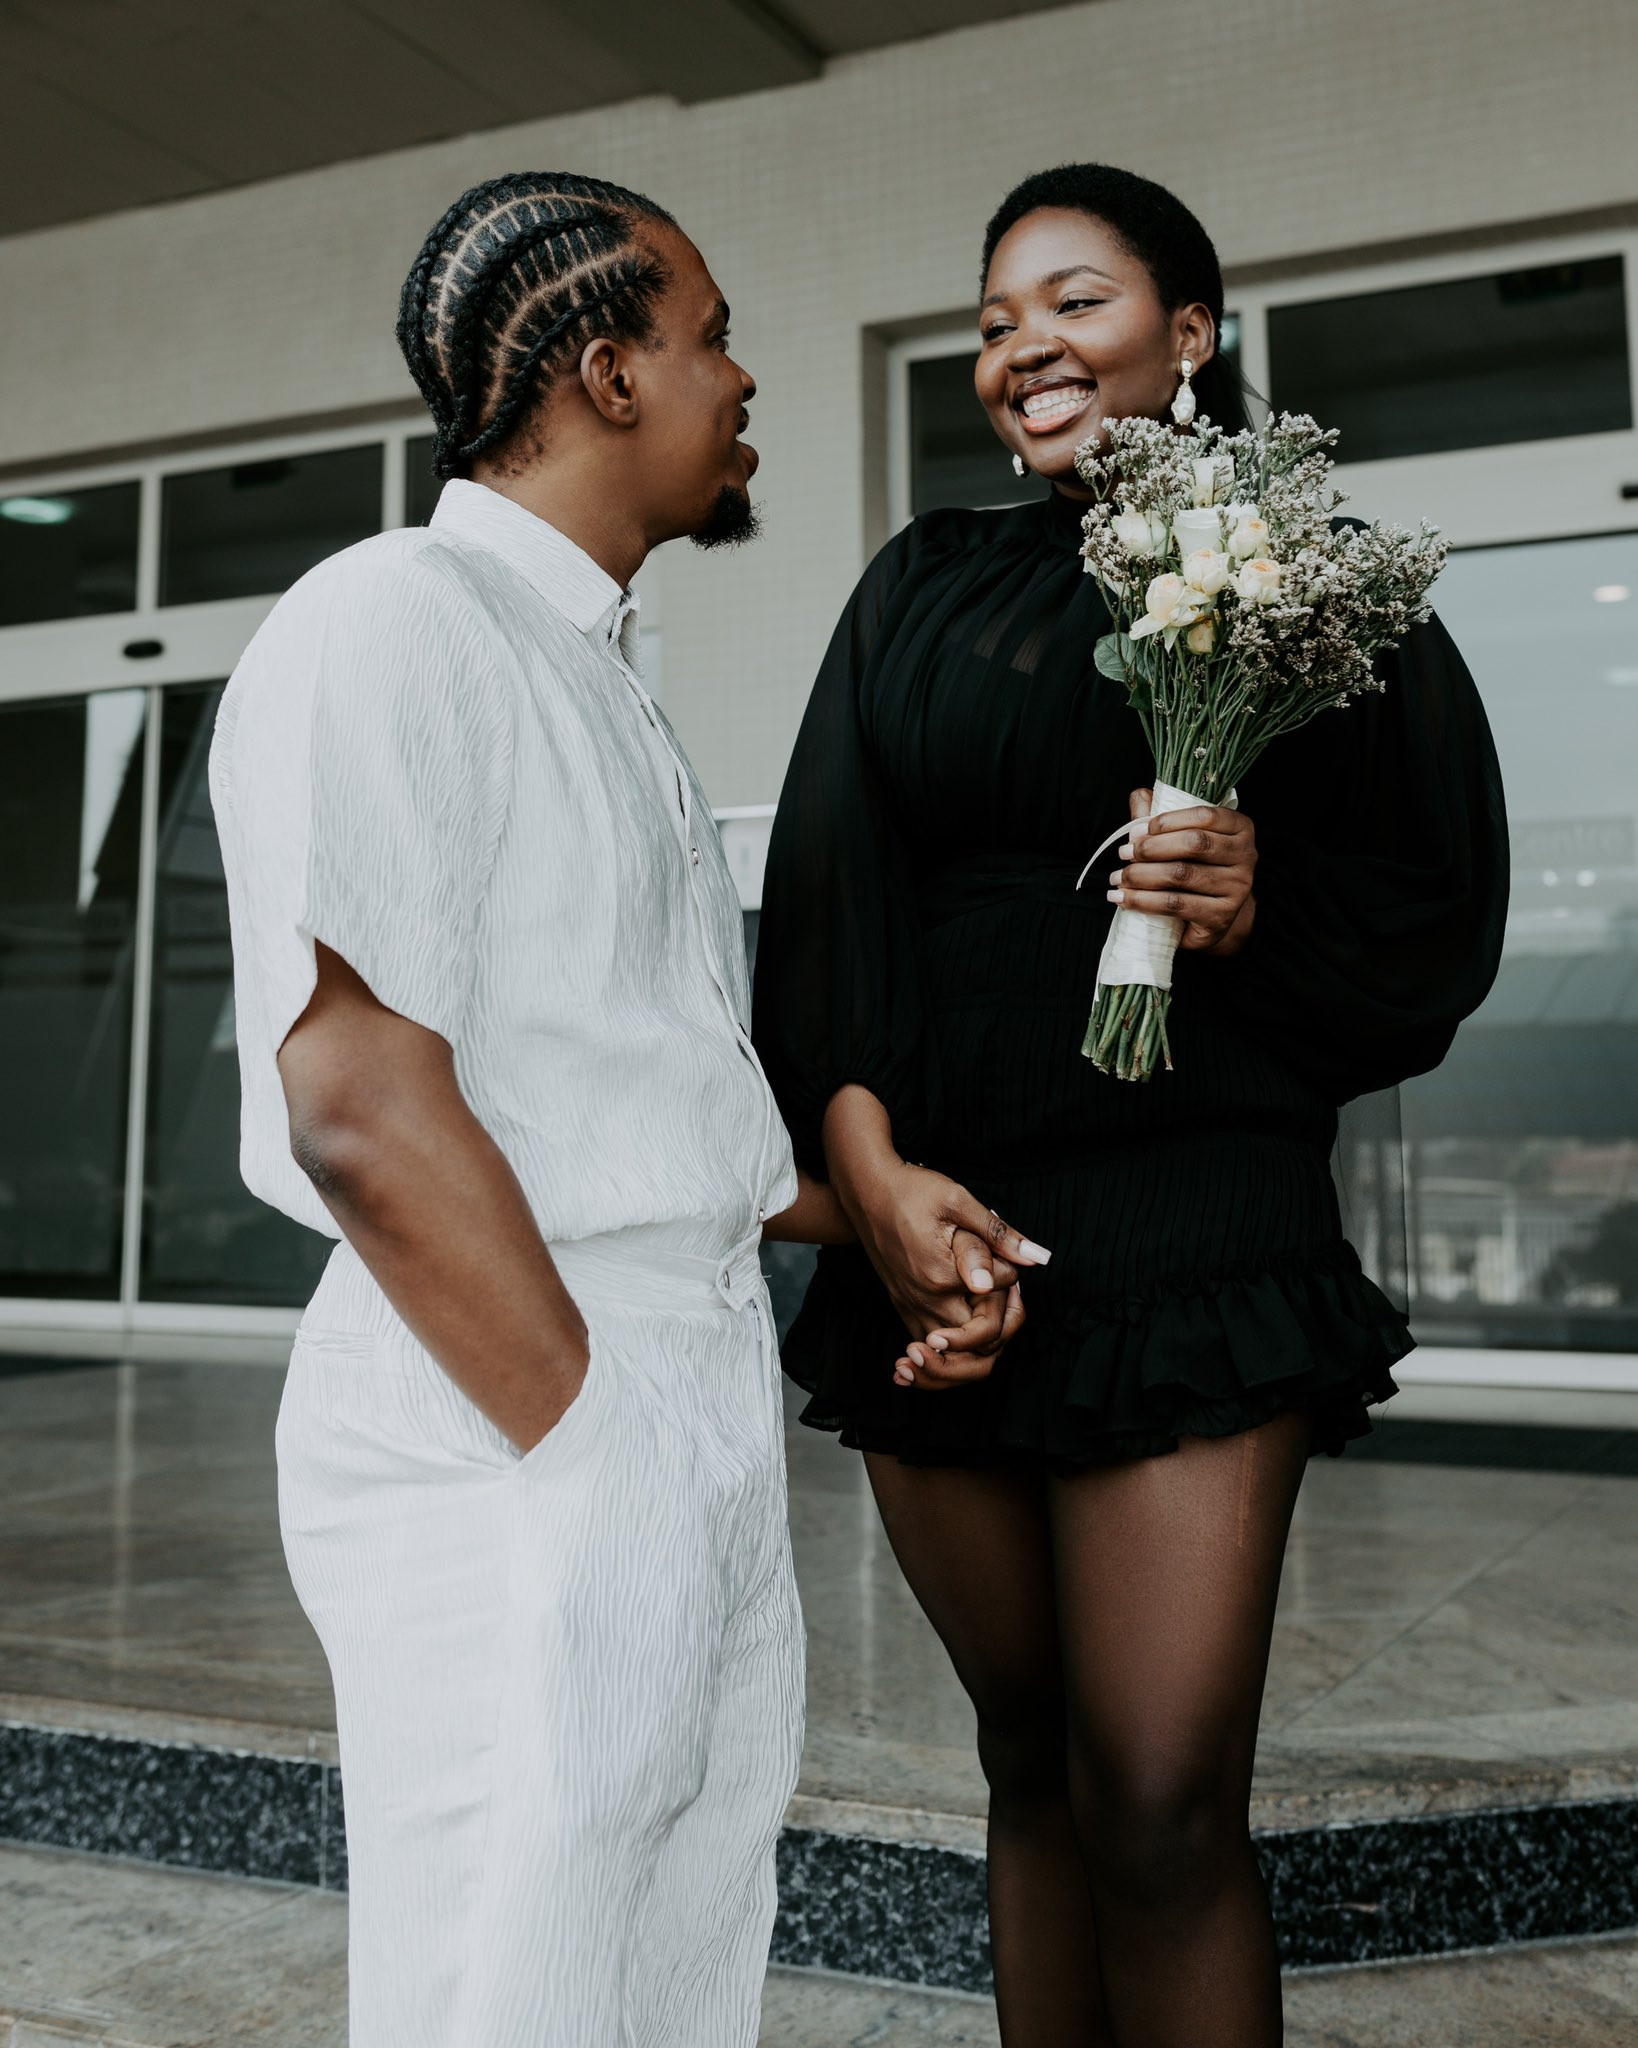 1670203945 912 Nigerian Couple039s Wedding Photos Go Viral After The Bride Wore